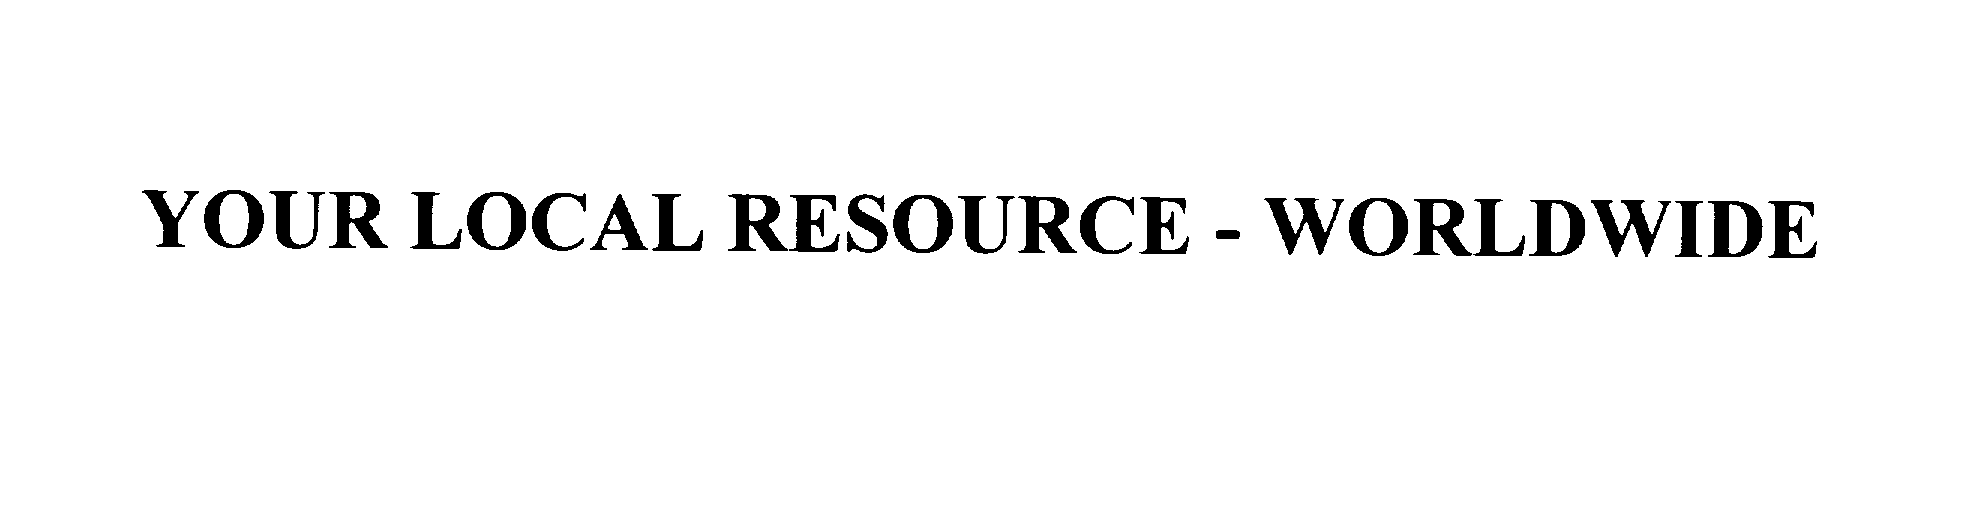  YOUR LOCAL RESOURCE - WORLDWIDE